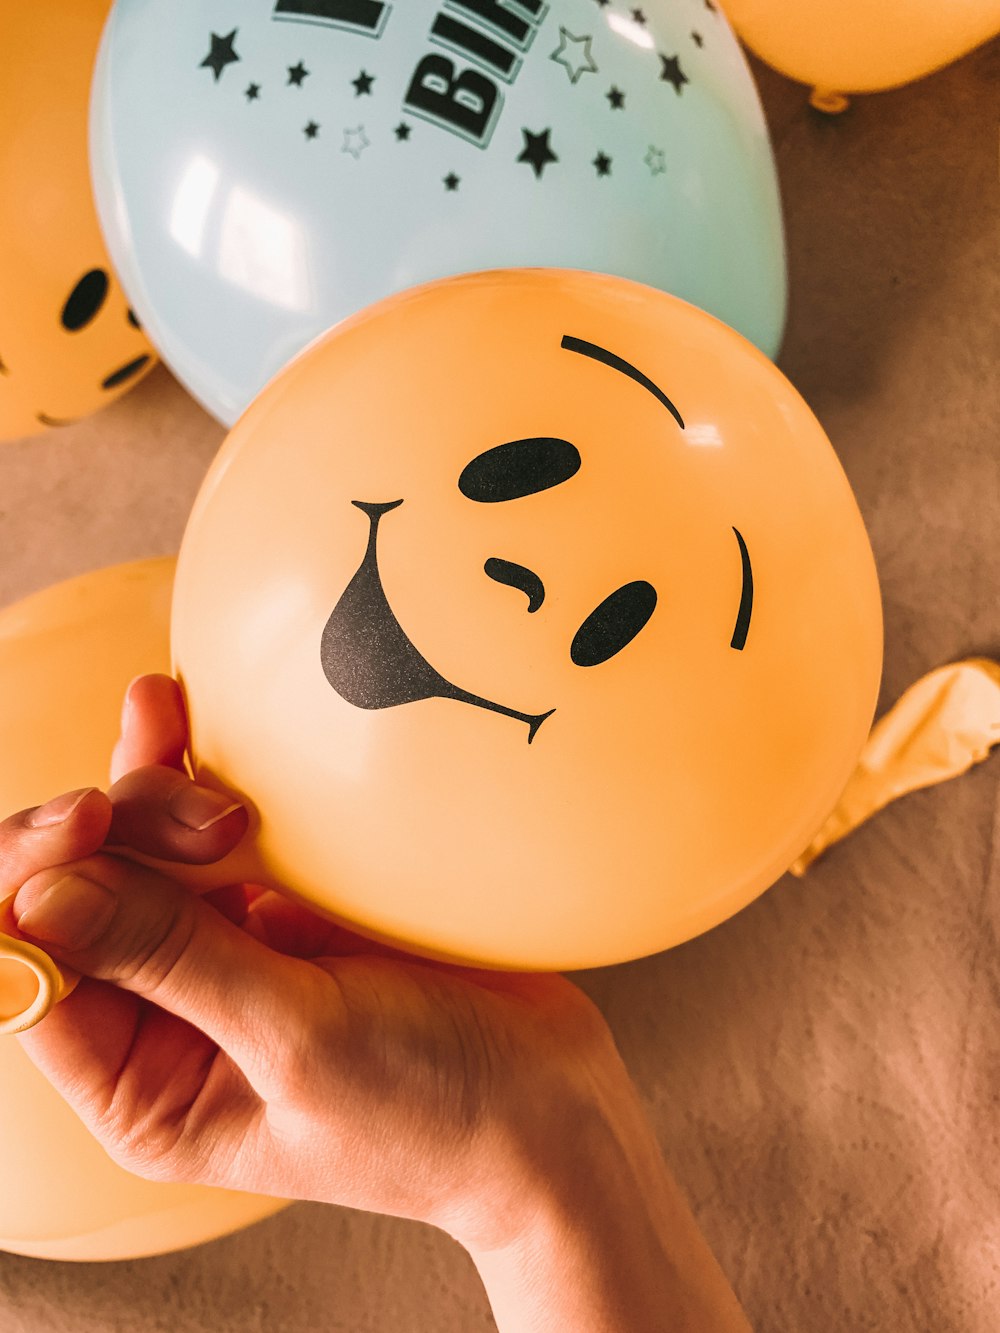 a person holding a balloon with a smiley face on it